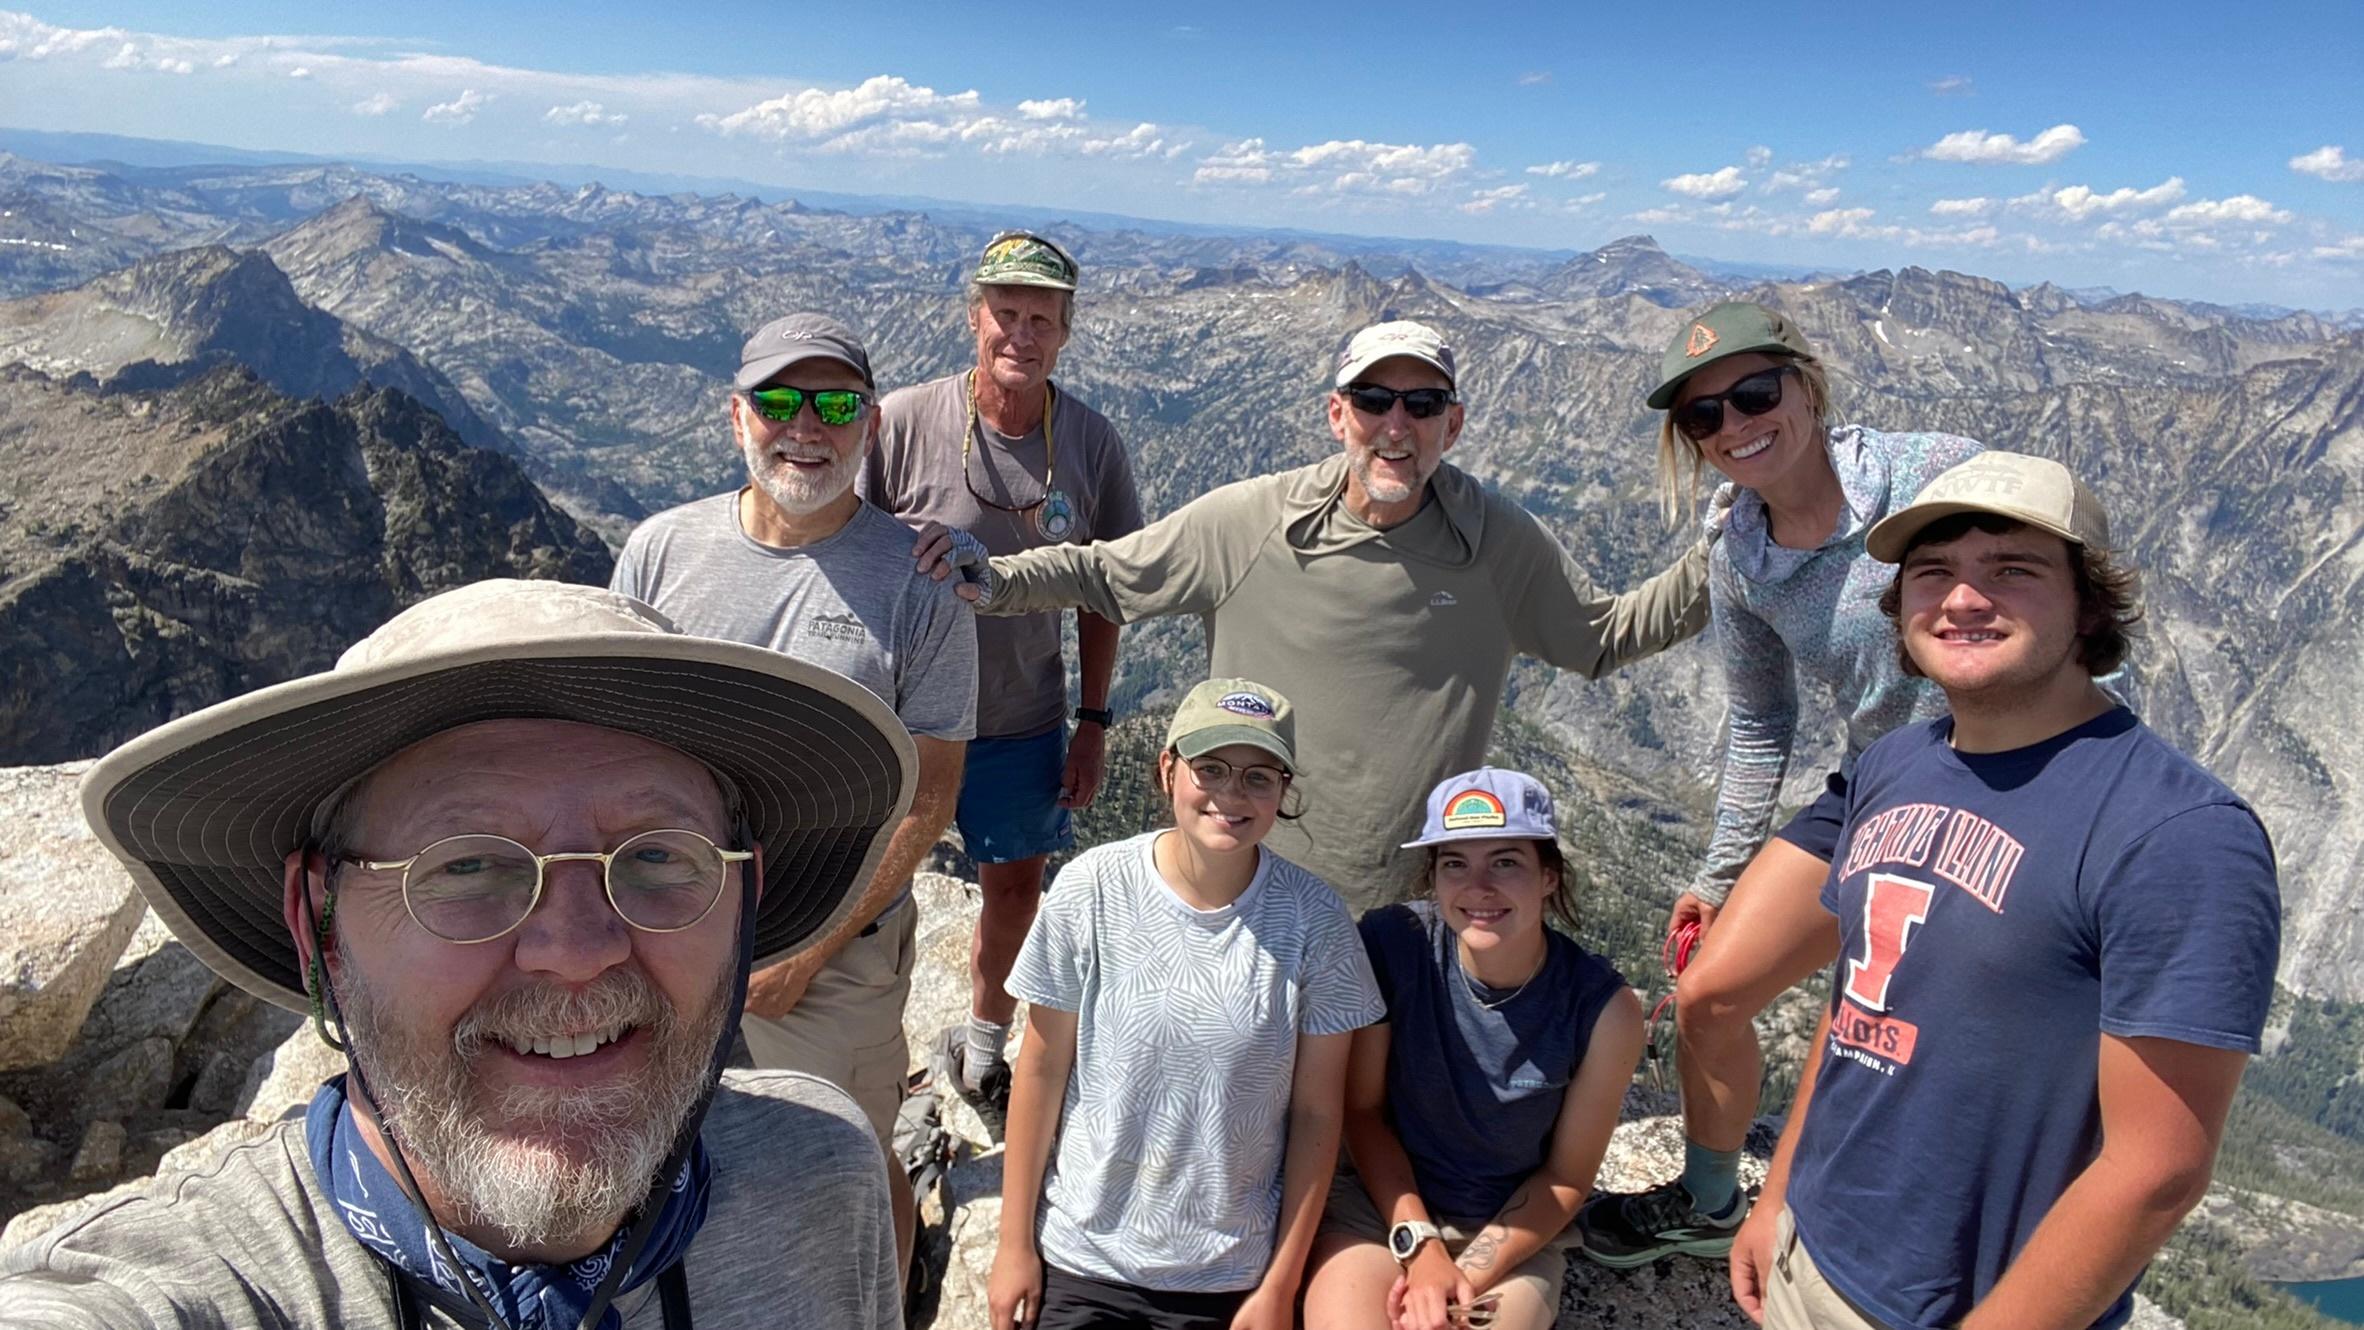 Jay Krajic, Bill Manny, Lauren Melink and group smiling on top of the mountain